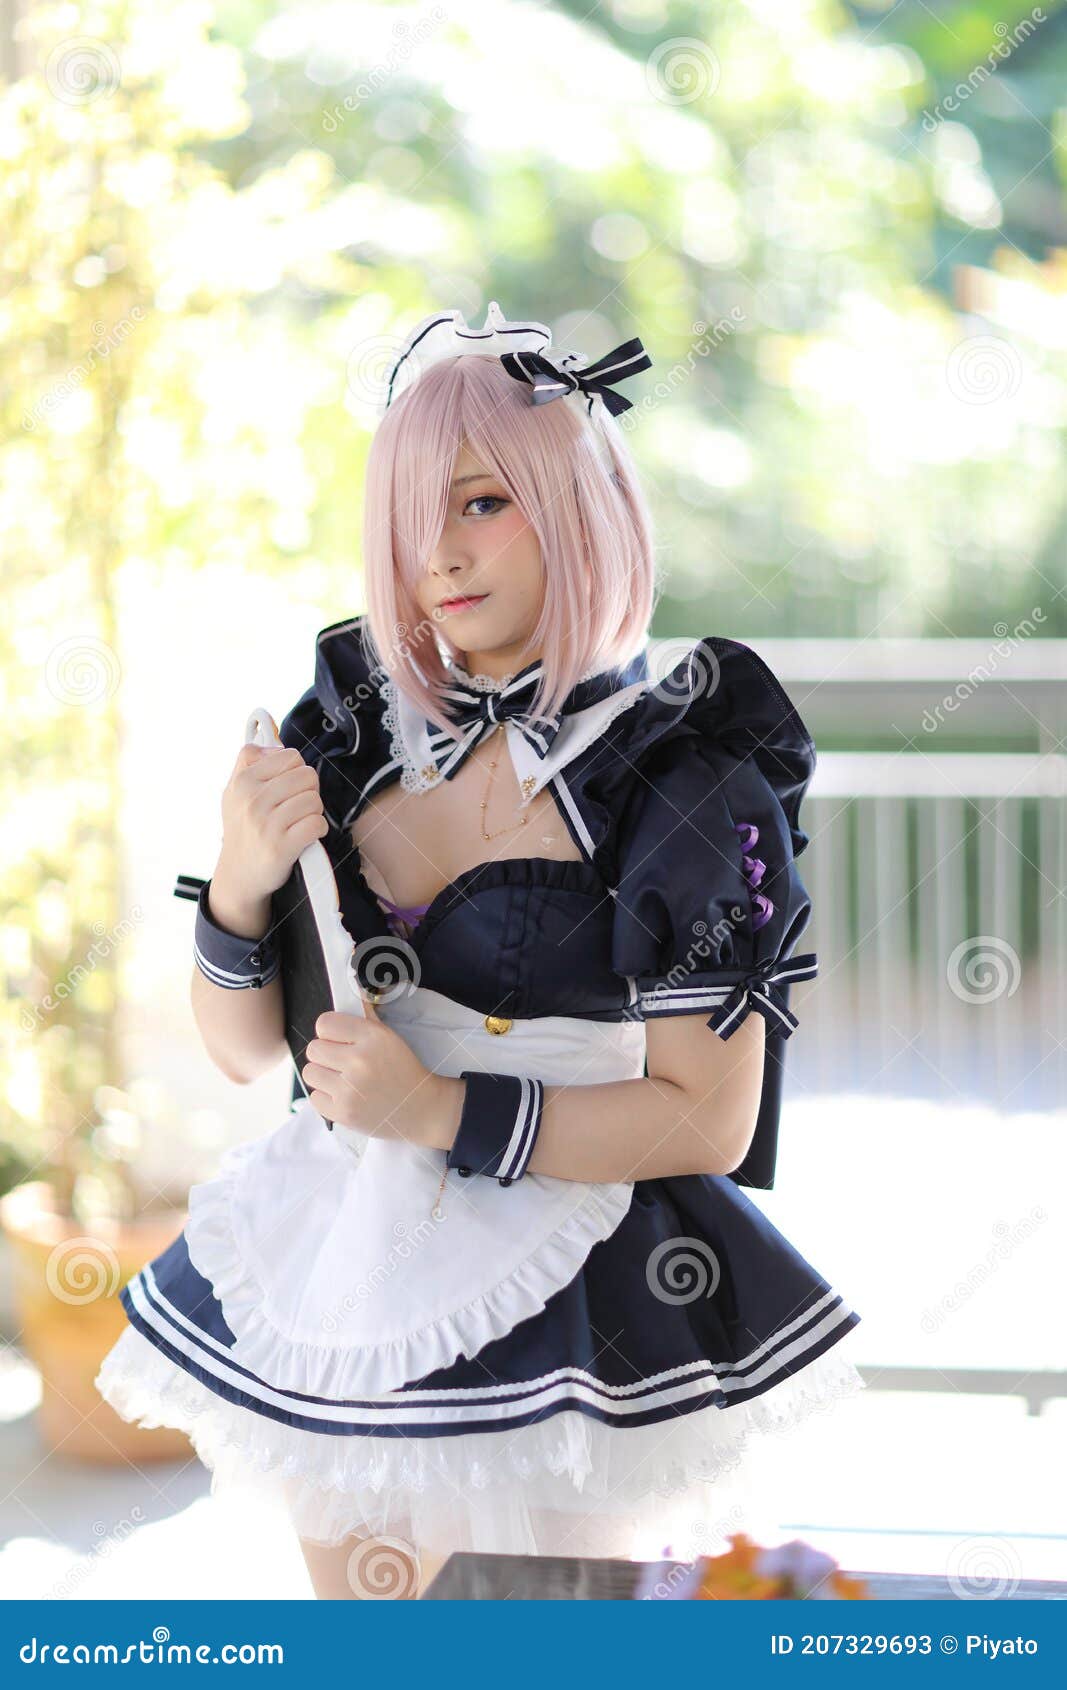 Hot Sale Sexy French Maid Costume Sweet Gothic Lolita Dress Anime Cosplay  Alice Maid Uniform Adult Halloween Costumes For Women  Fruugo IN